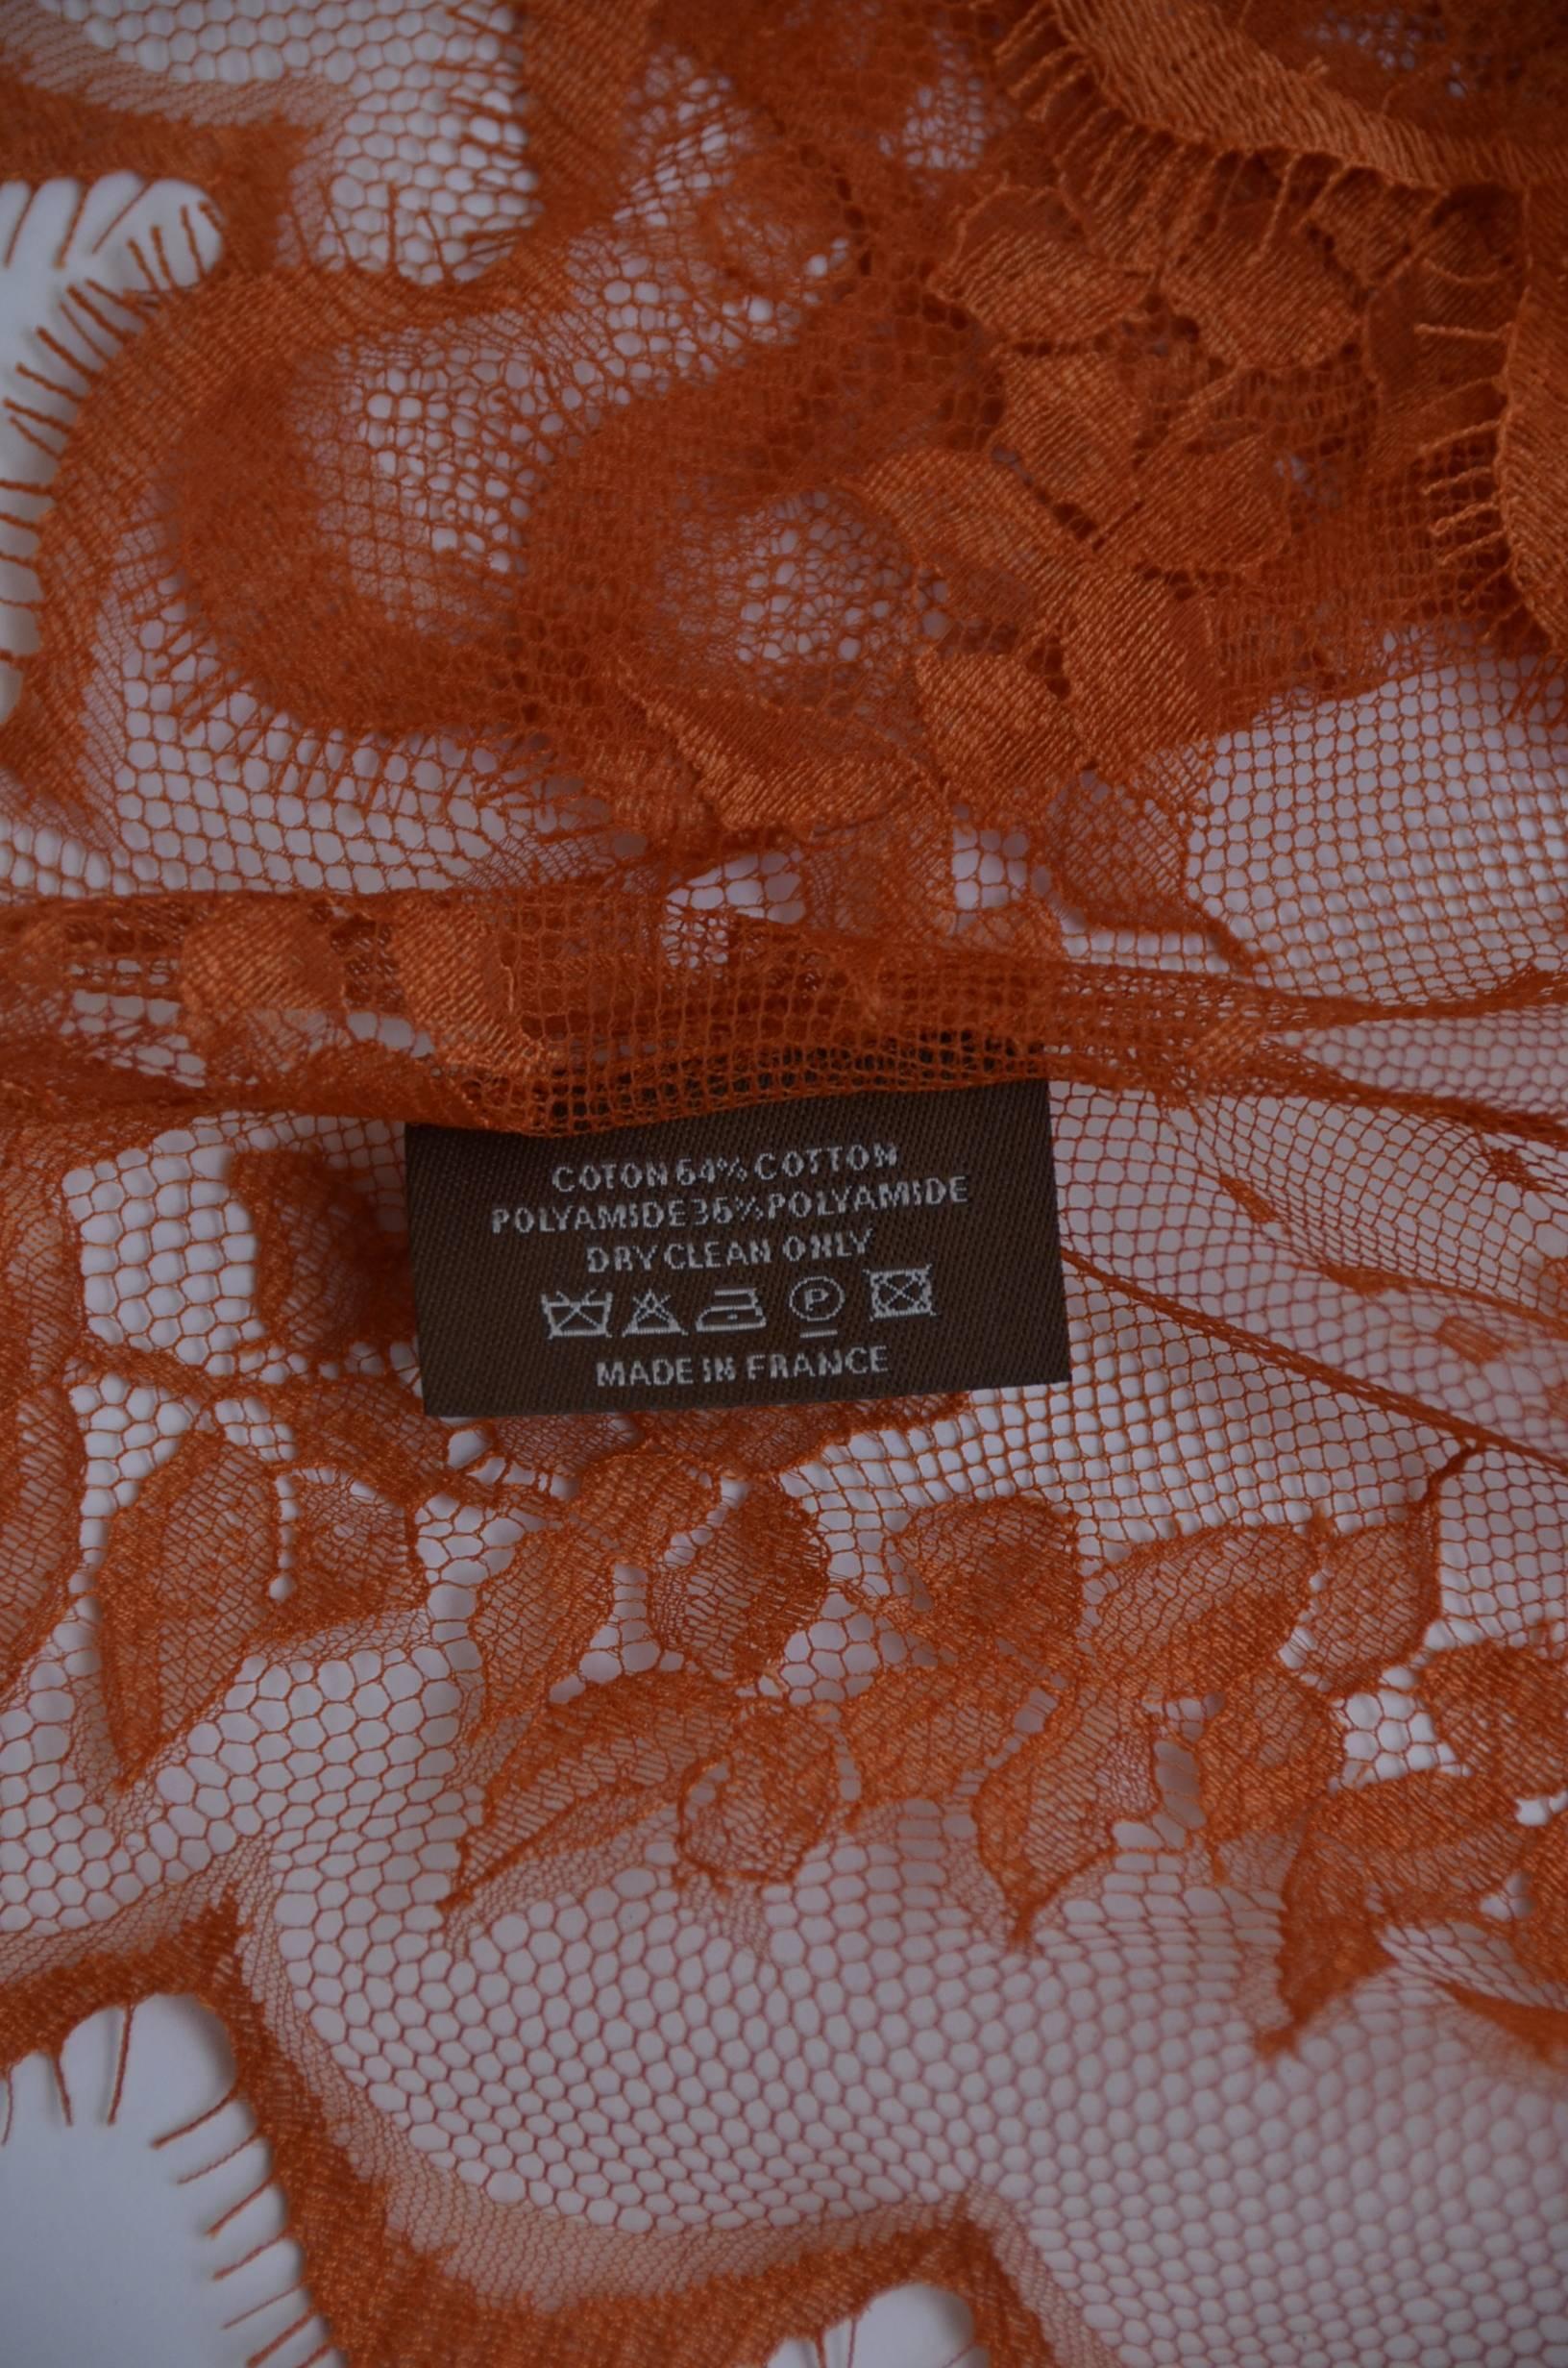 Amazing Rare HERMES Lace Scarf With Hermes Paris Embroidery New at 1stDibs